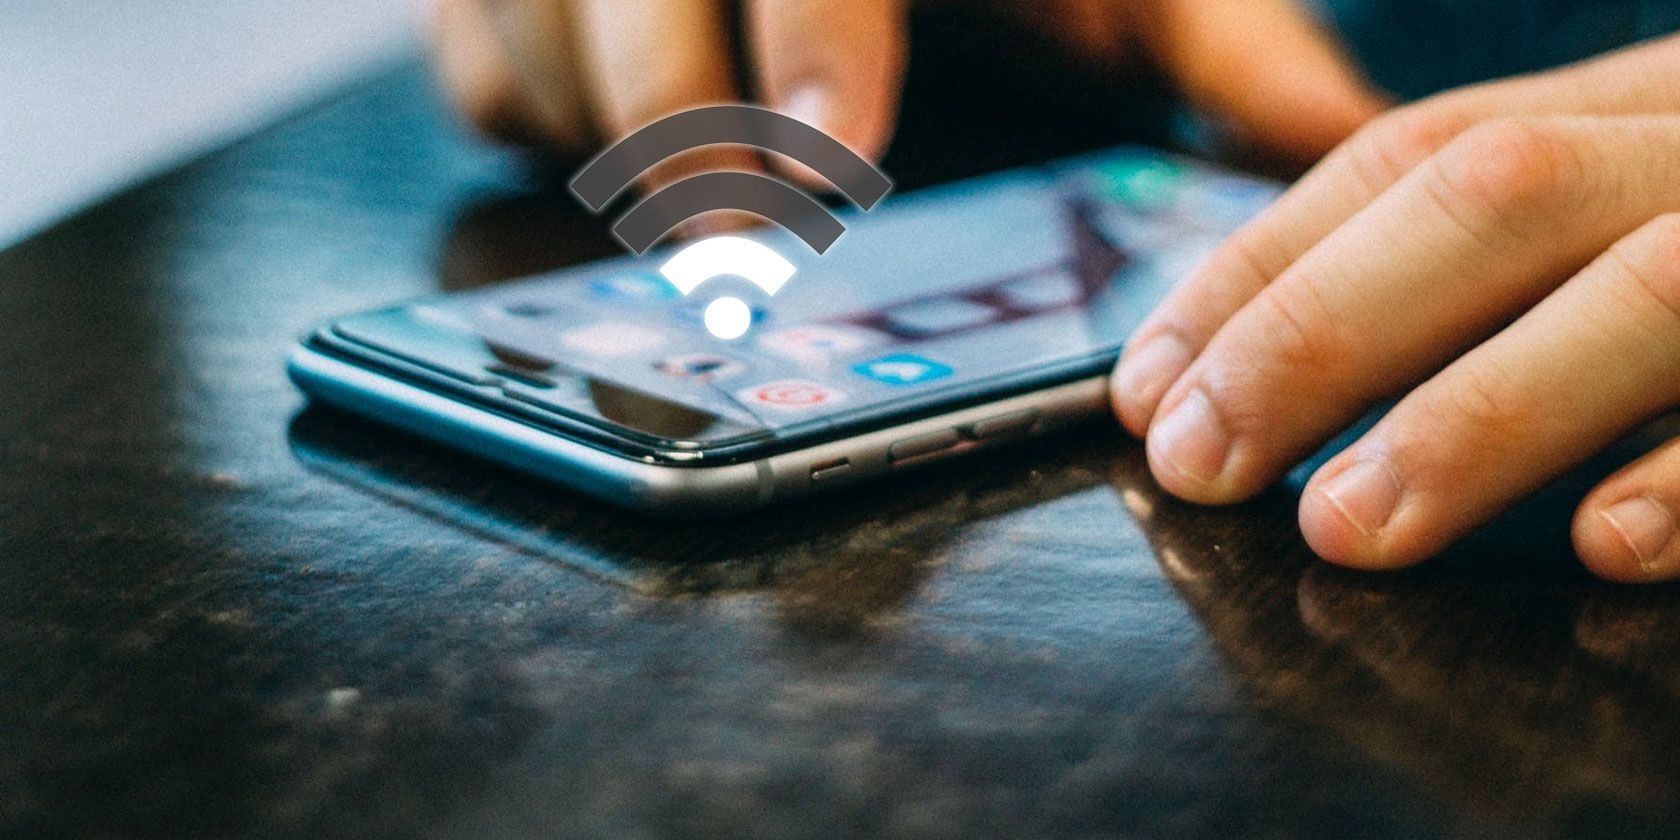 7 Reasons Why Wi-Fi Internet Is Slow on Your Phone